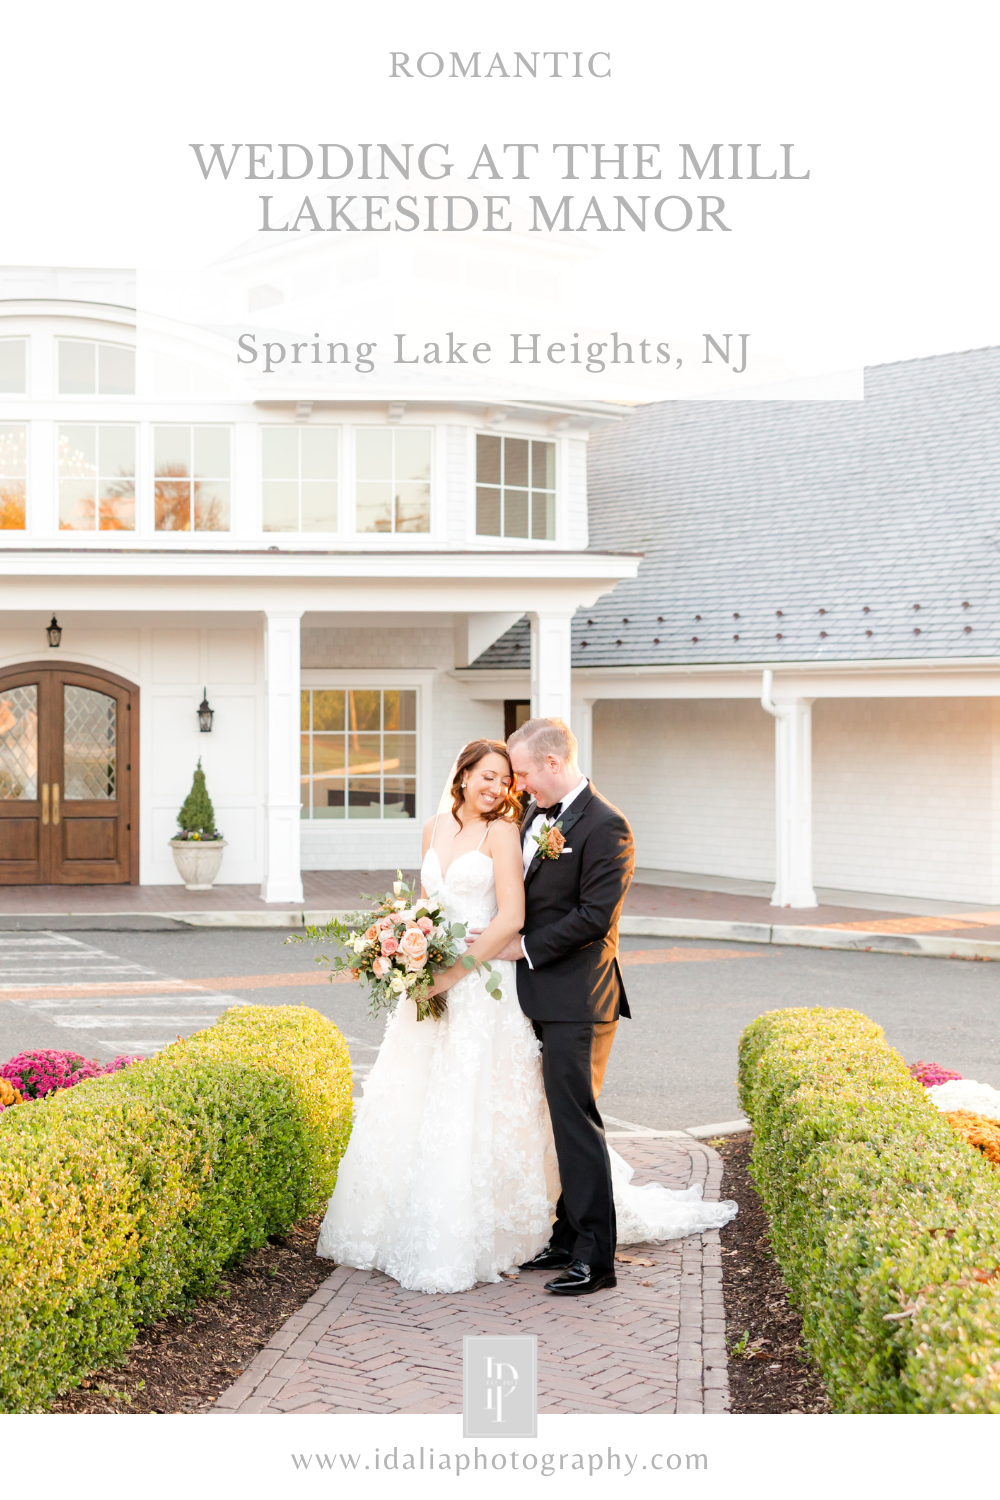 Quintessential shore wedding in the fall at the Mill Lakeside Manor in Spring Lake Heights, NJ photographed by Idalia Photogrpahy